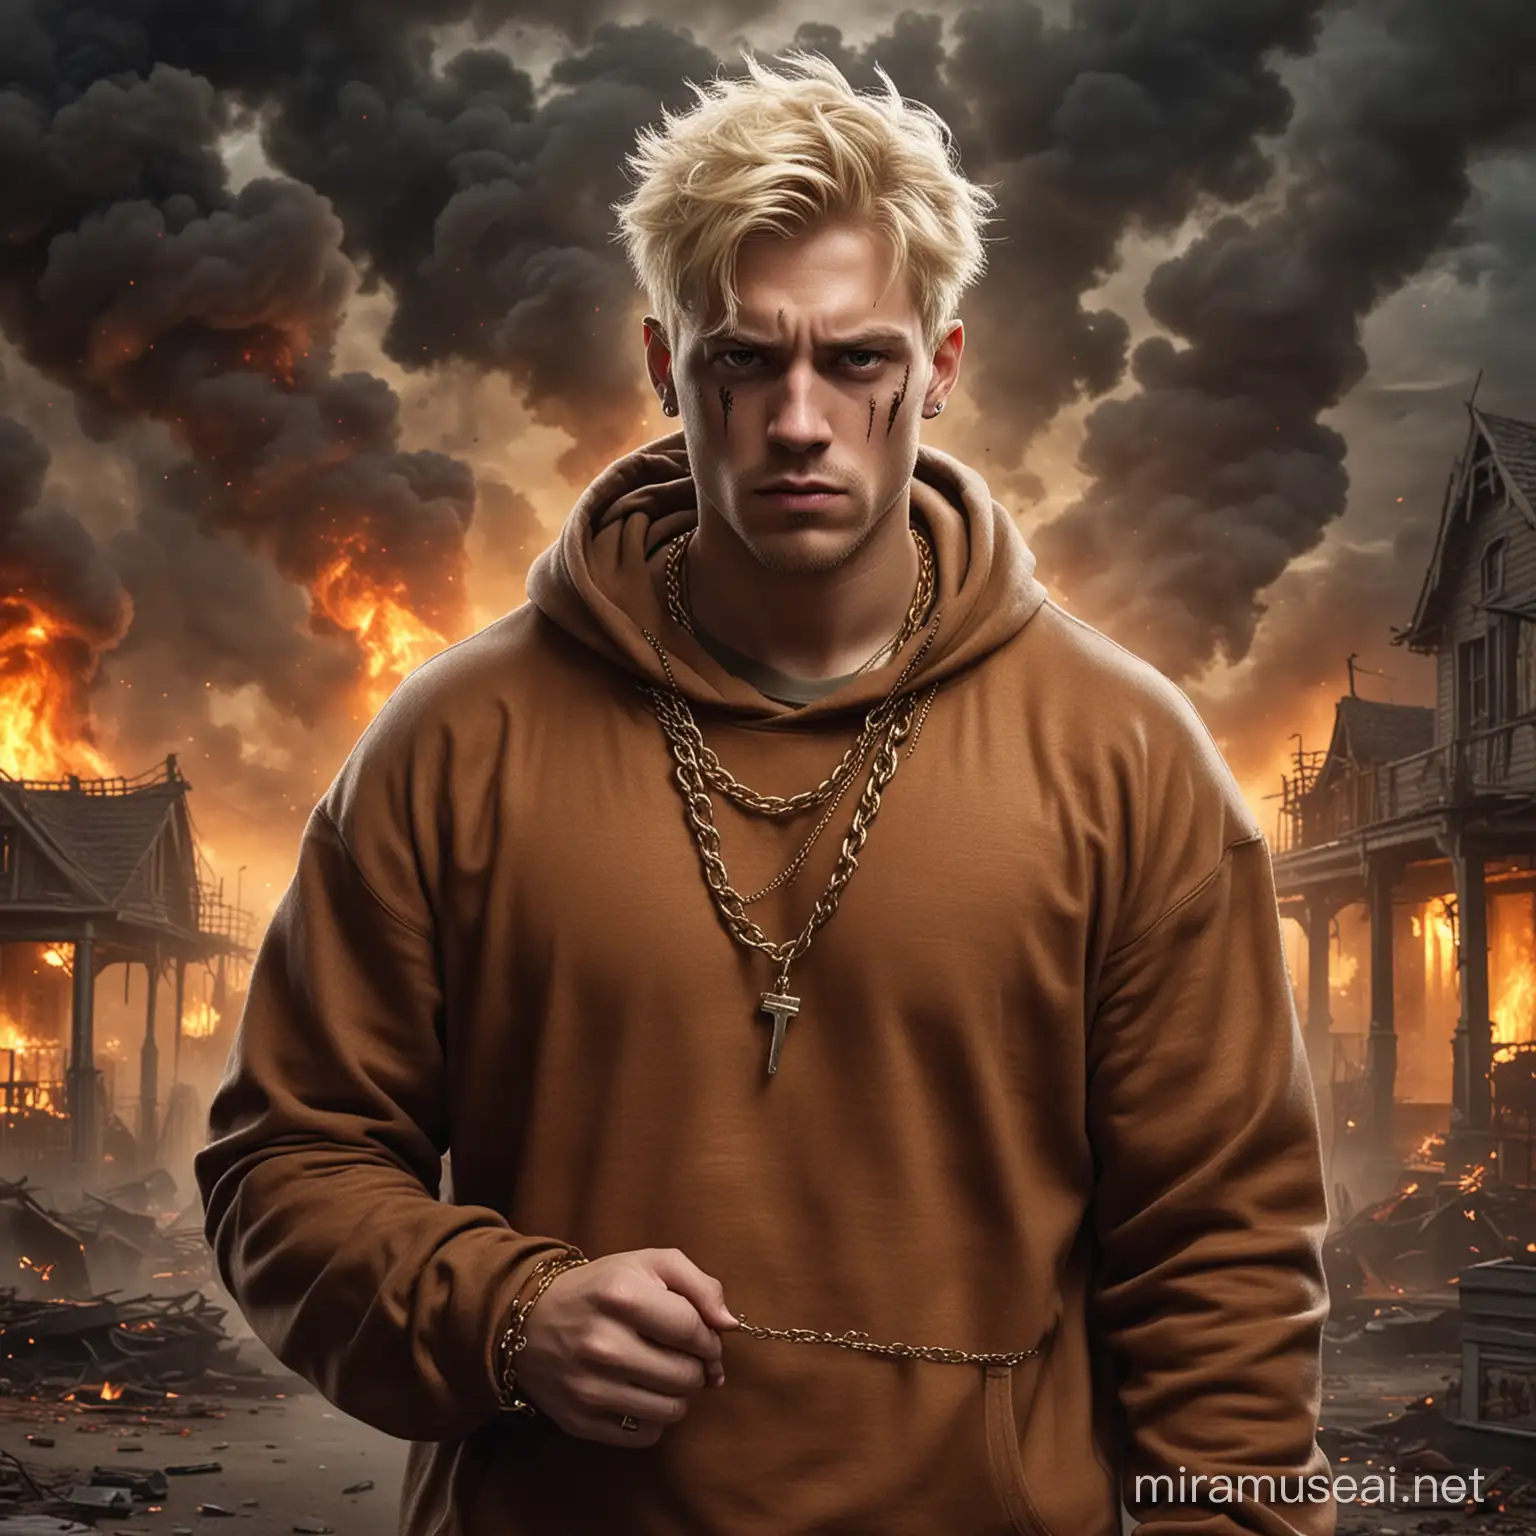 Blond Male in Brown Sweatshirt Amid Chaotic Zombie Apocalypse